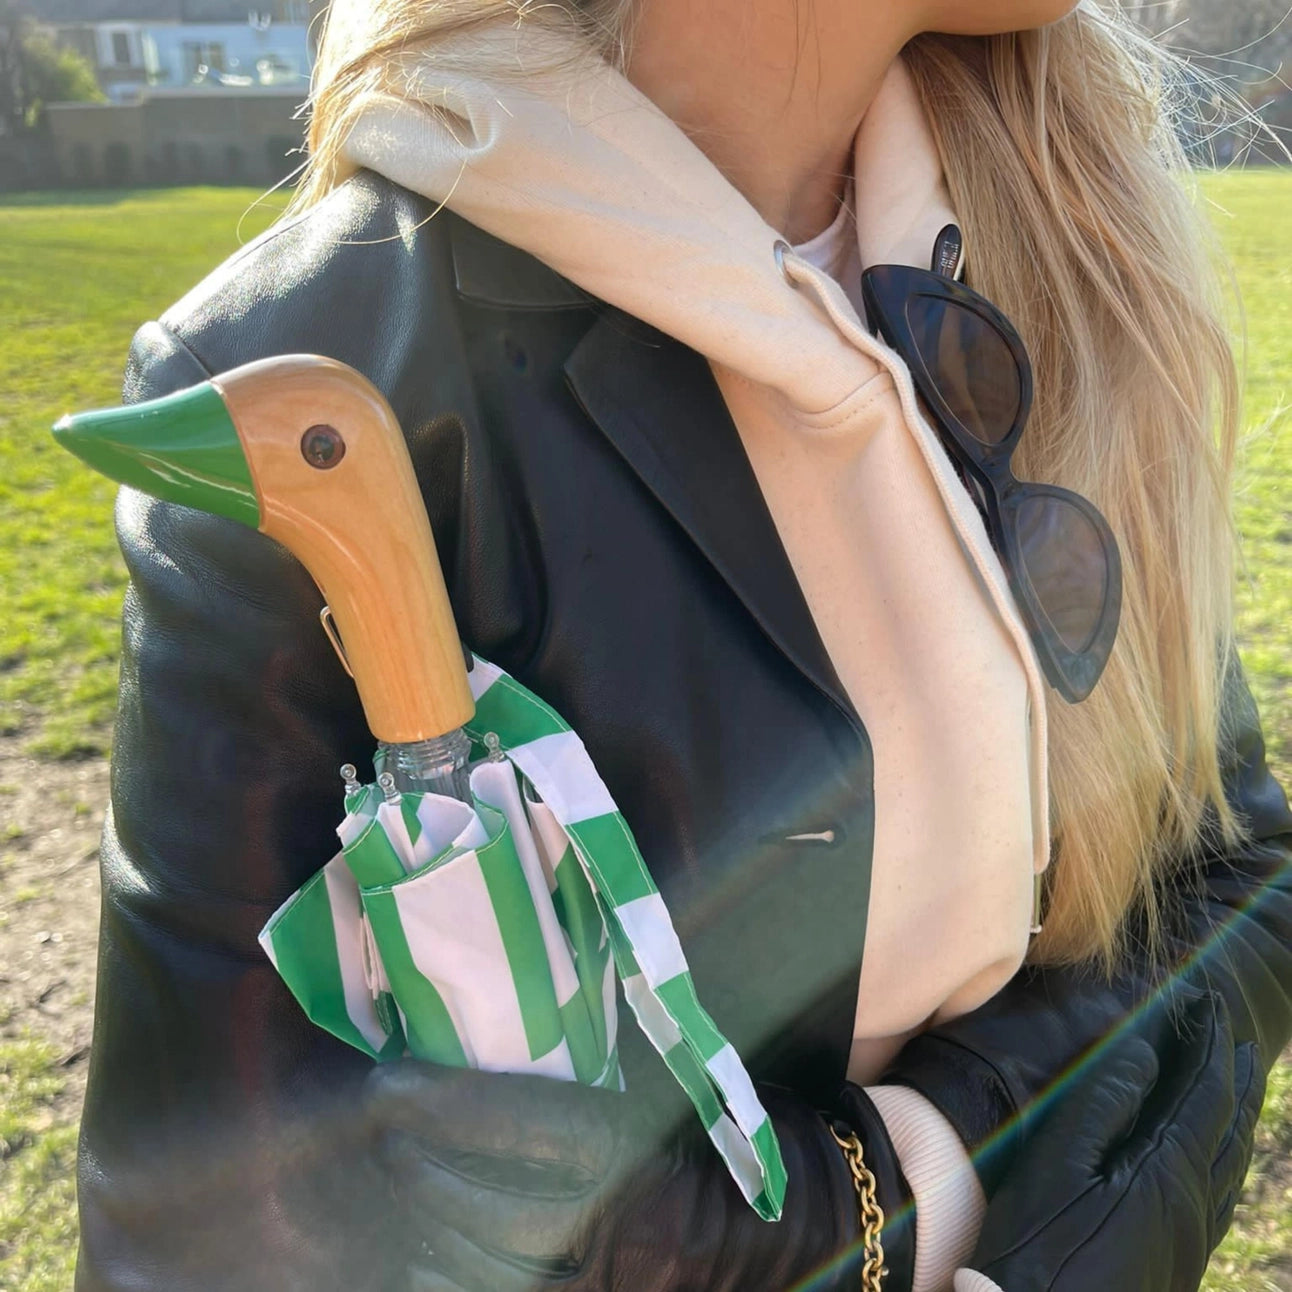 The Every Space handmade green, duck handled umbrellas, by Original Duckhead, are wind resistant with an automatic open button, and made from 100% recycled fabric.